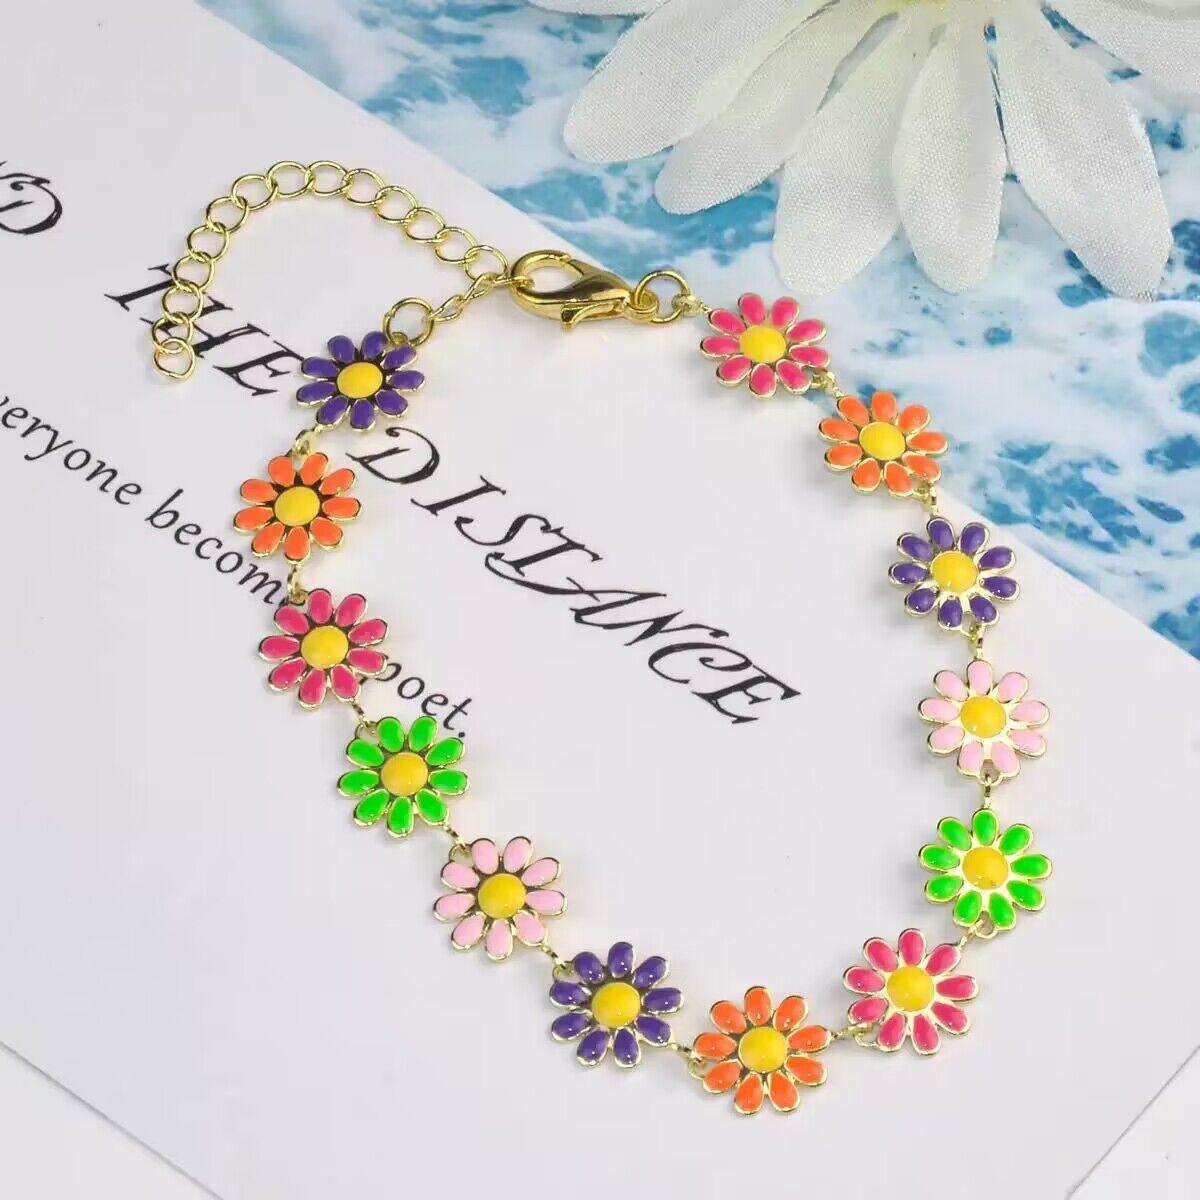 New jewelry, fashion daisy clavicle necklace, sweet bohemian style, chrysanthemum necklace